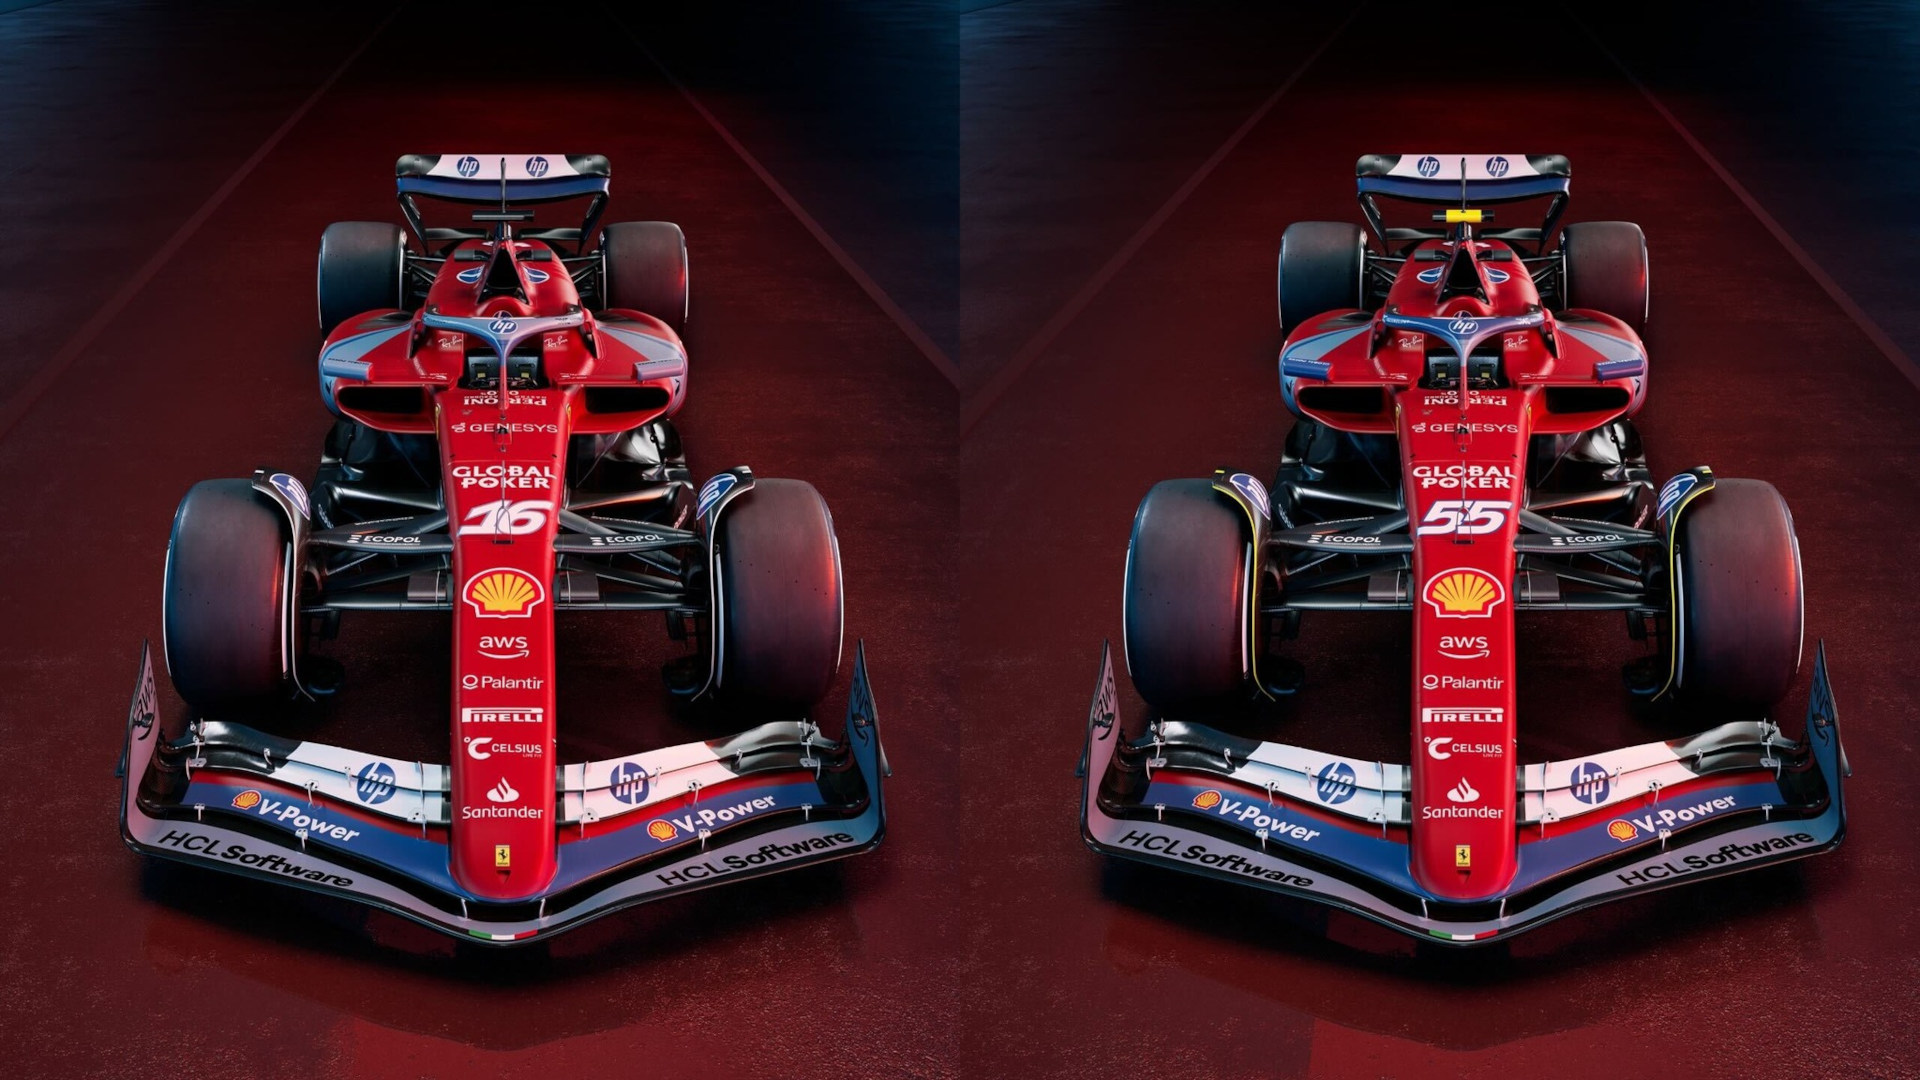 Ferrari to race in Miami GP with blue livery